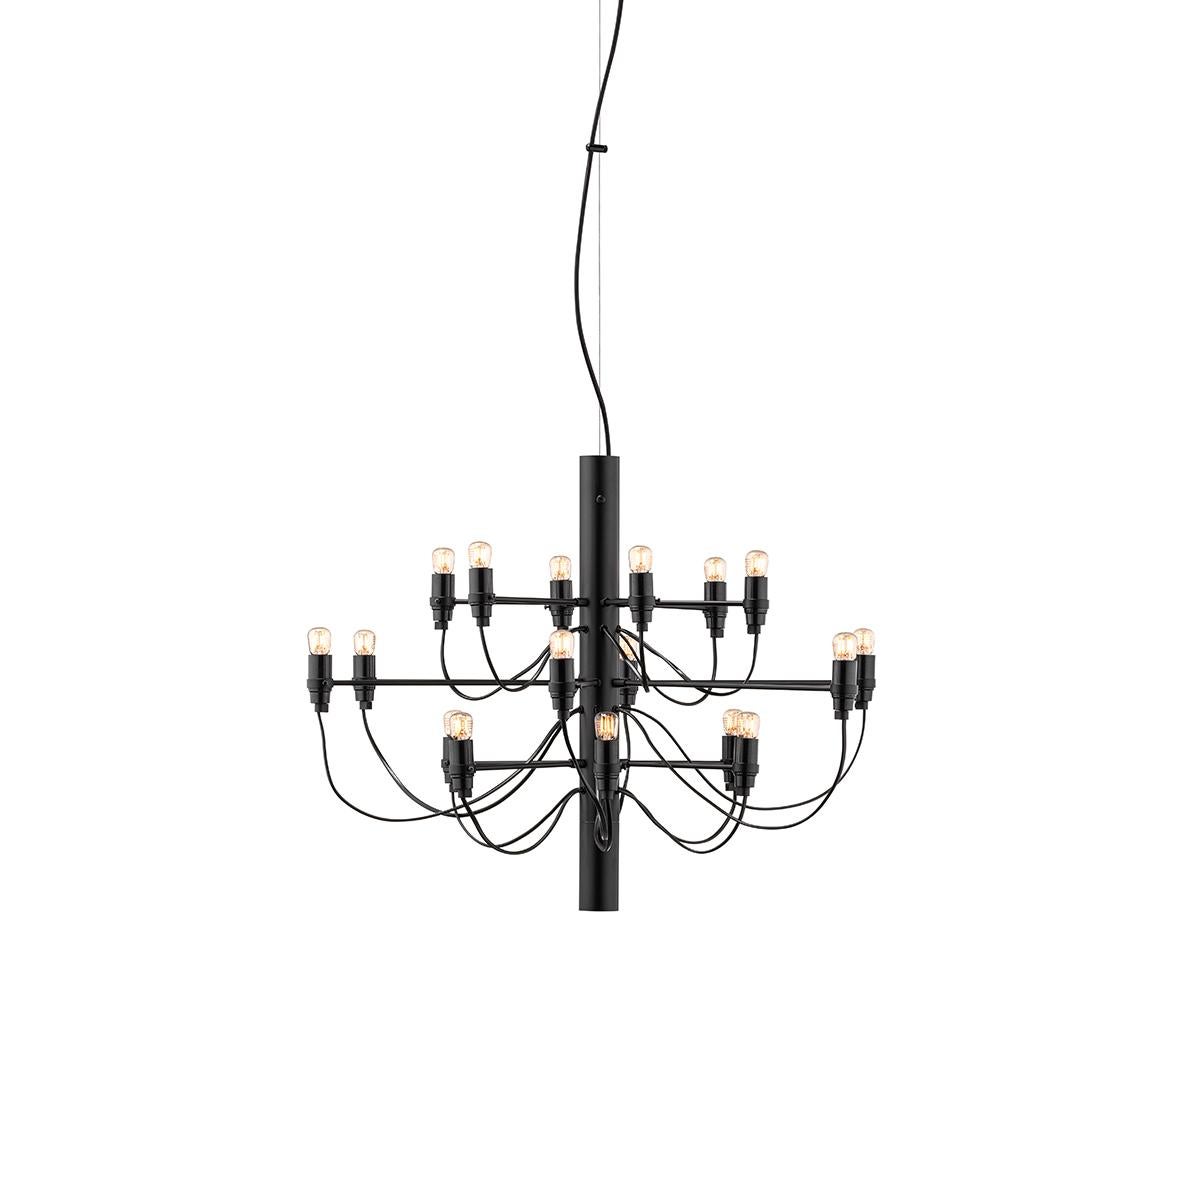 For Sale: Black (Matte Black) FLOS 2097/18 Suspension Lamp in Steel and Brass, by Gino Sarfatti 2